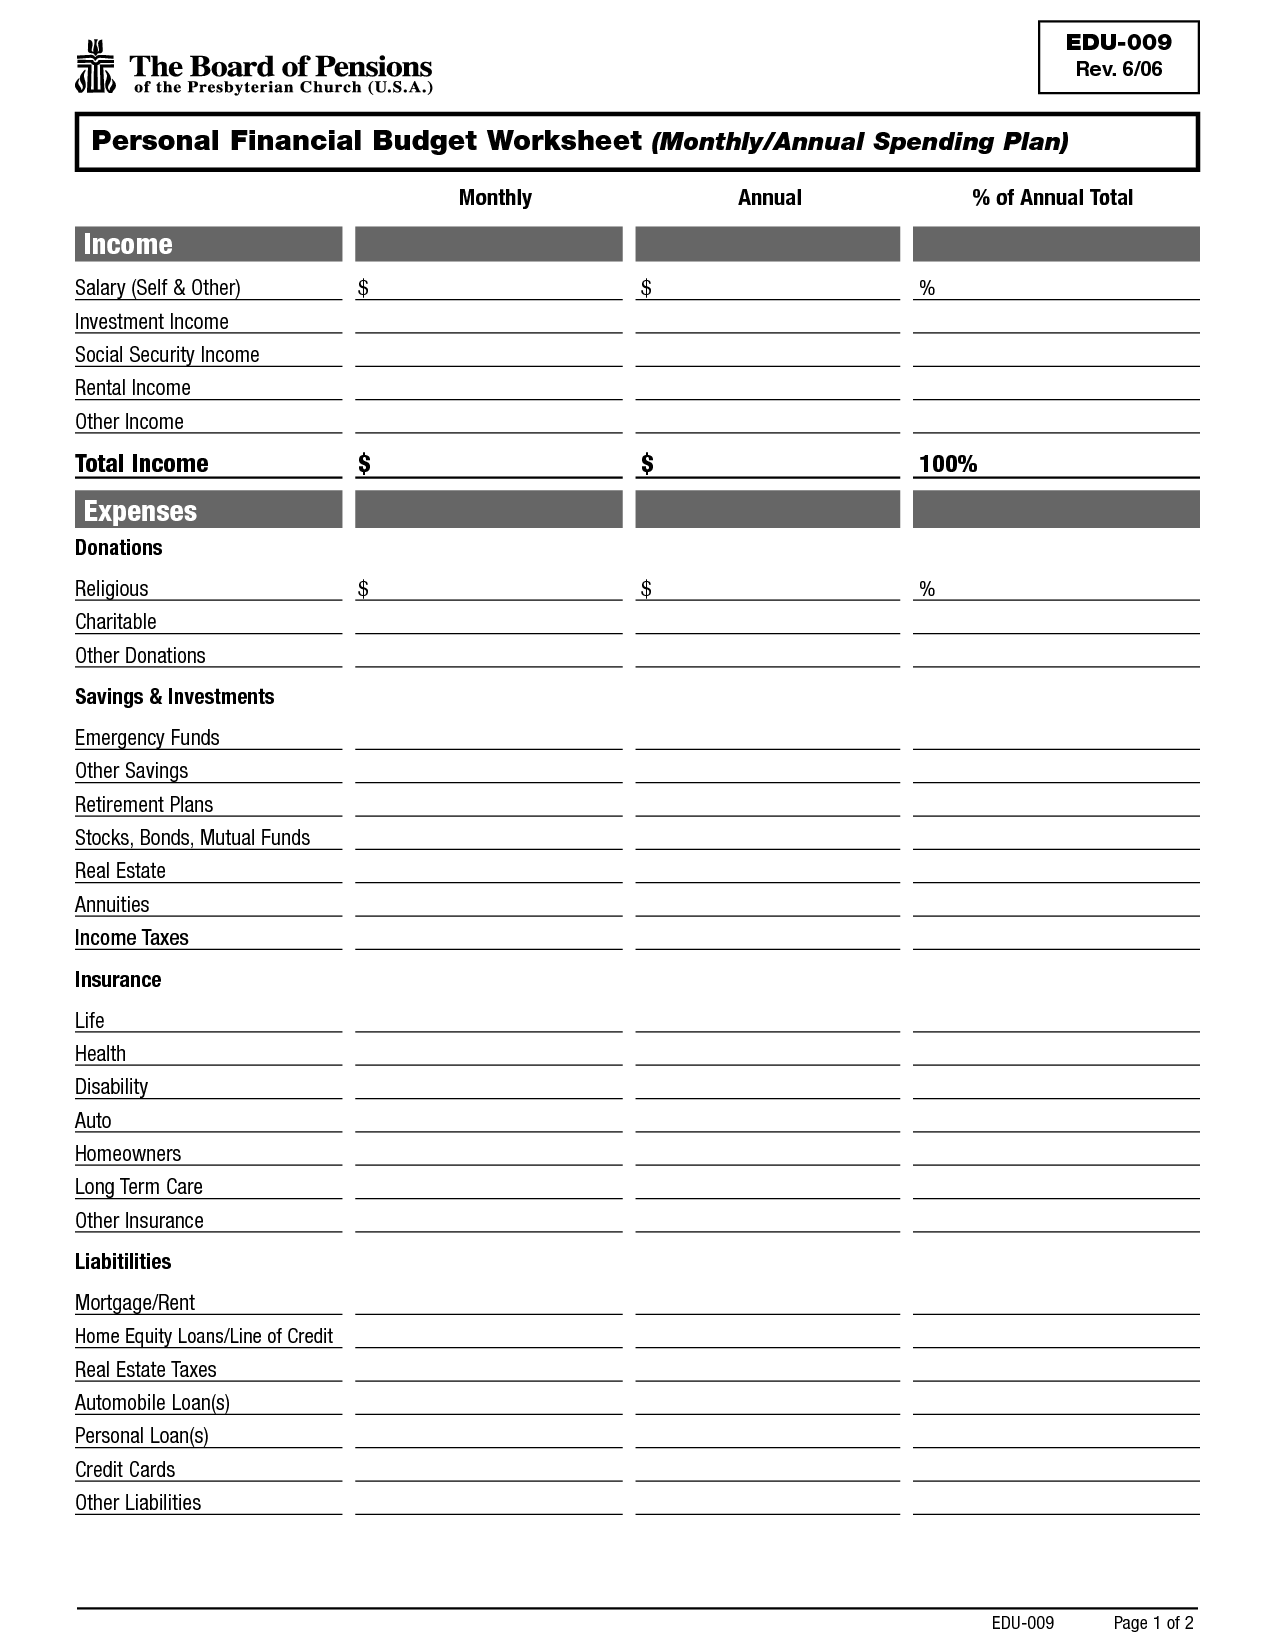 Monthly Financial Budget Worksheet Image